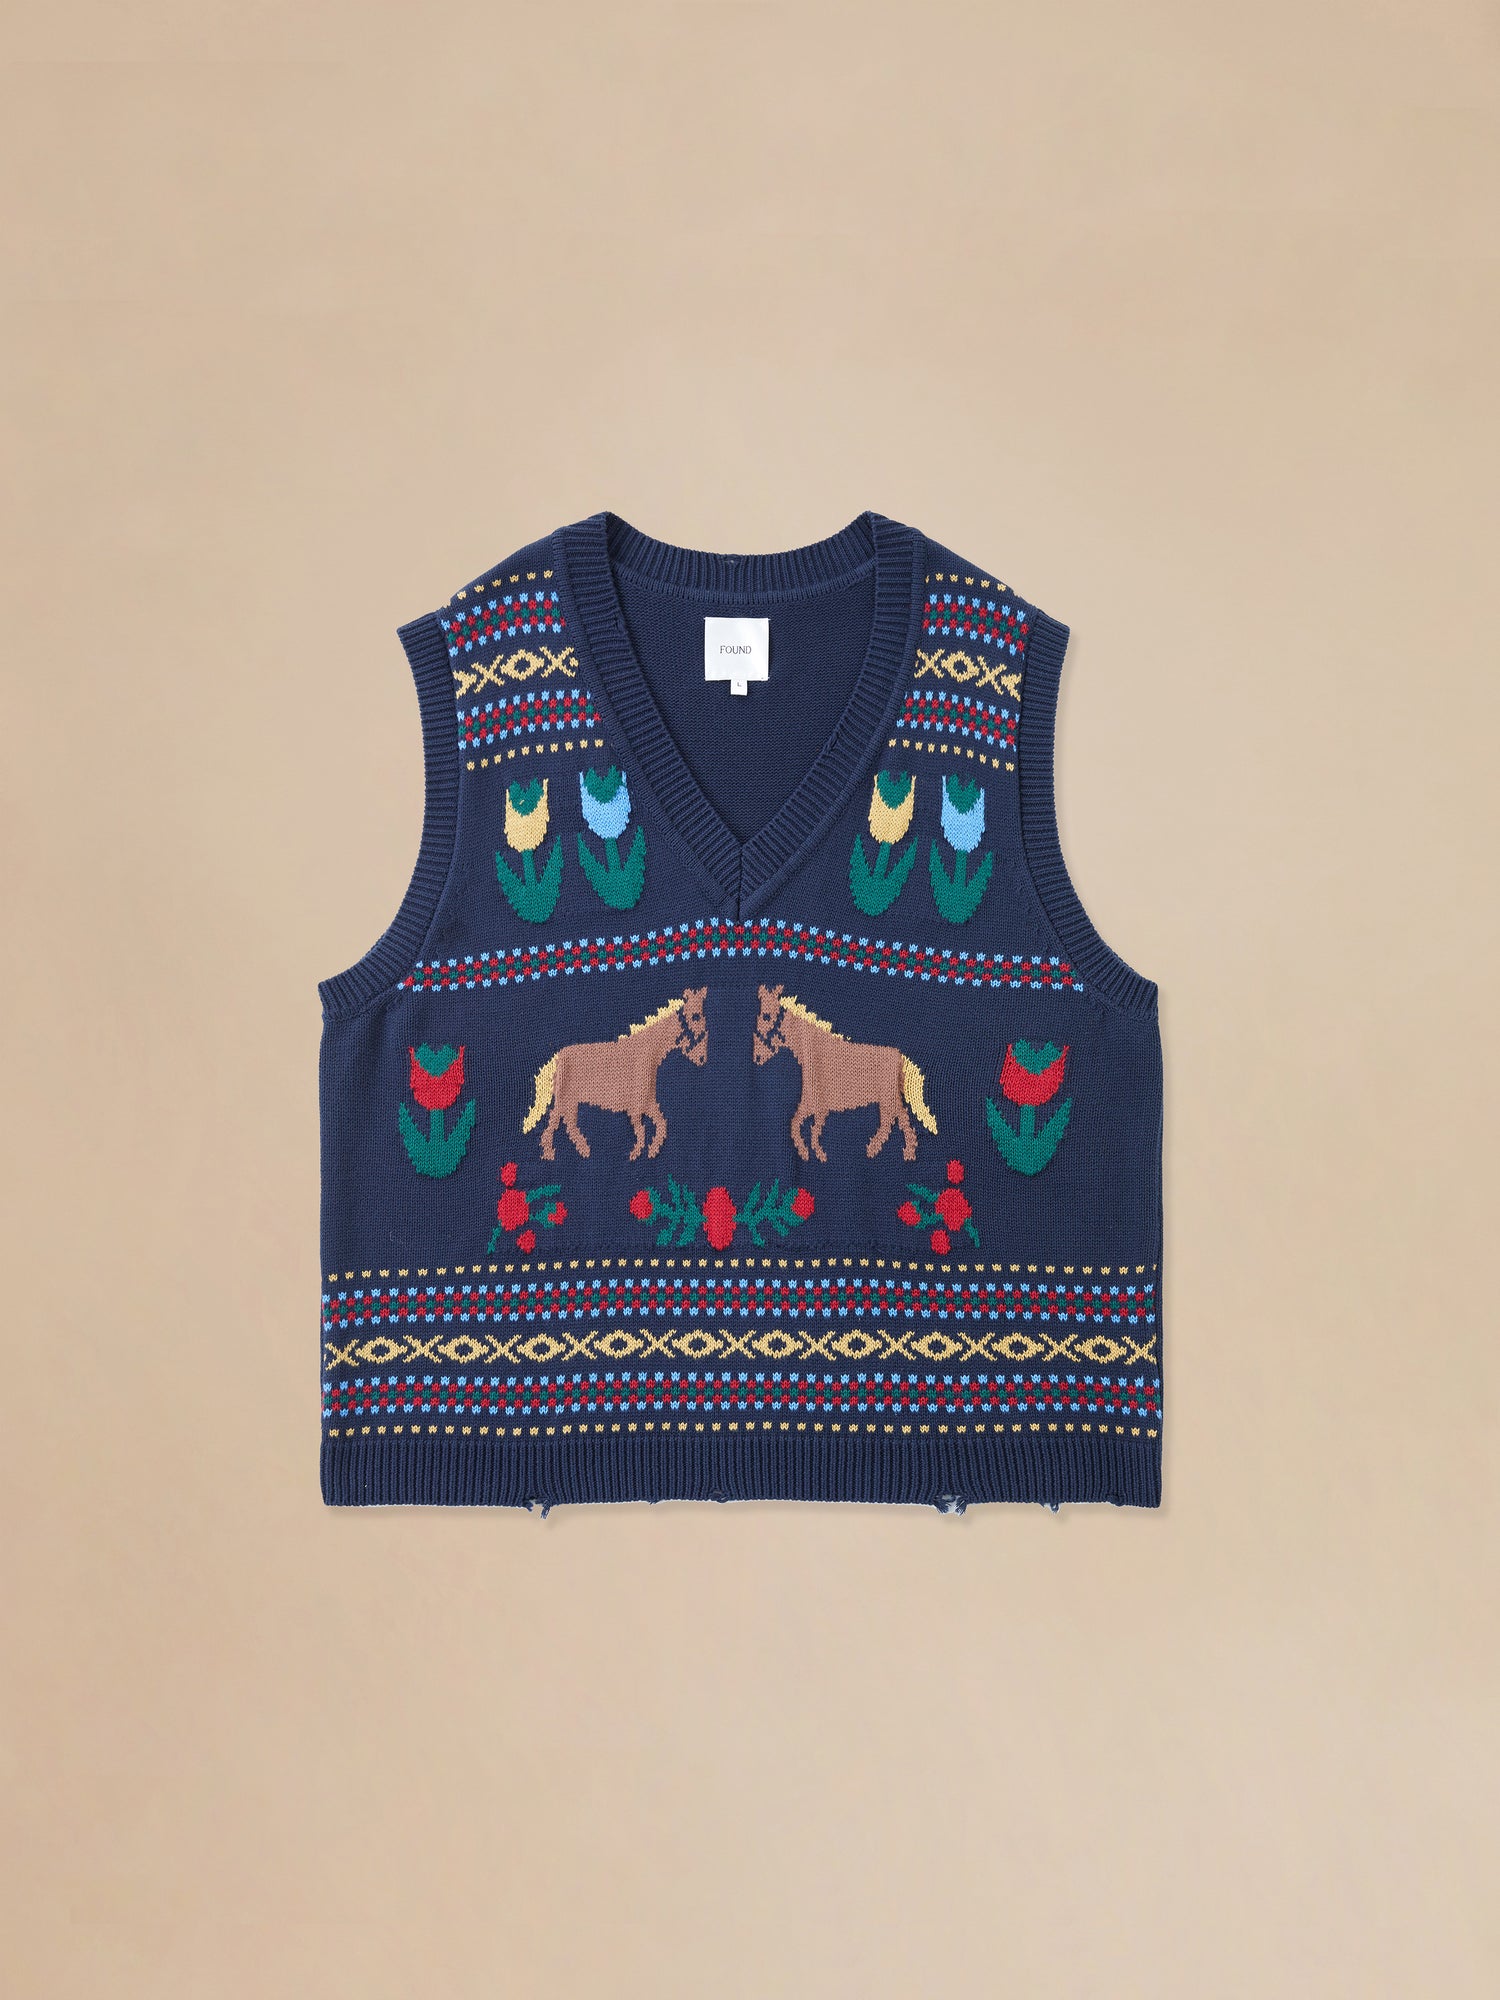 A Found Isle Horse Reverie Sweater Knit Vest with a horse on it.